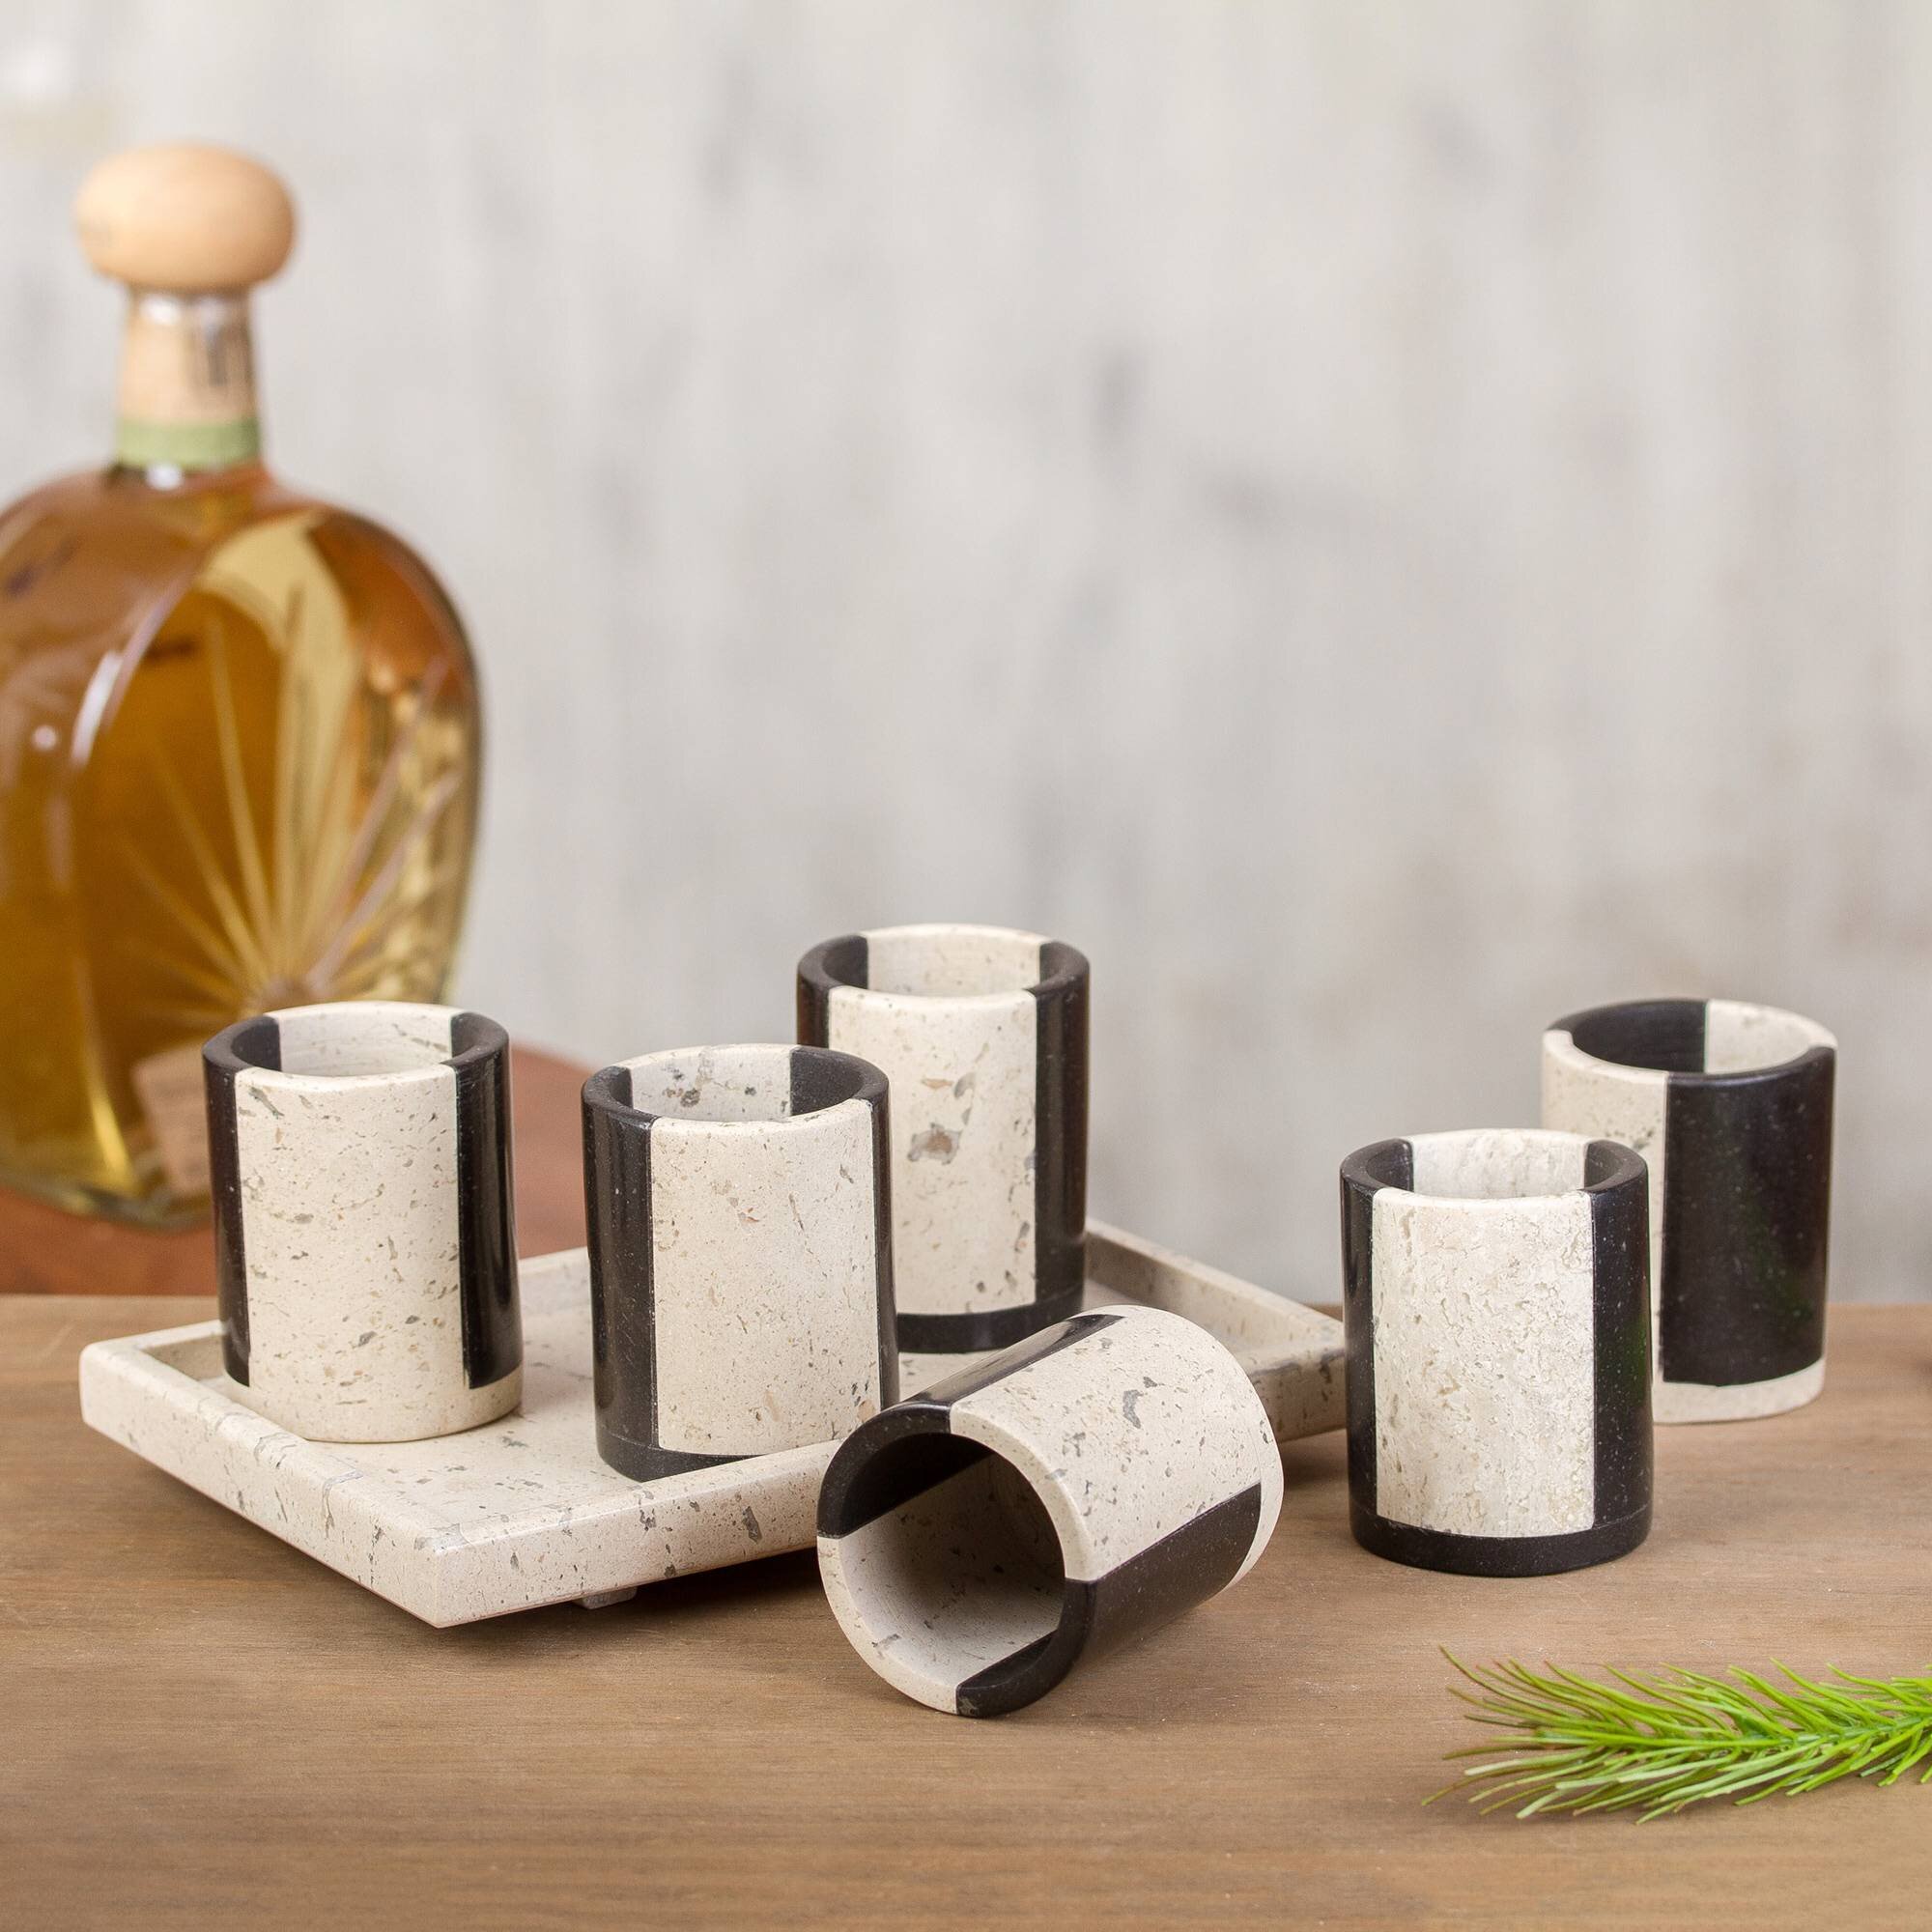 What Are The Most Important Reasons That You Should Purchase Stoneware Drinking Glasses?